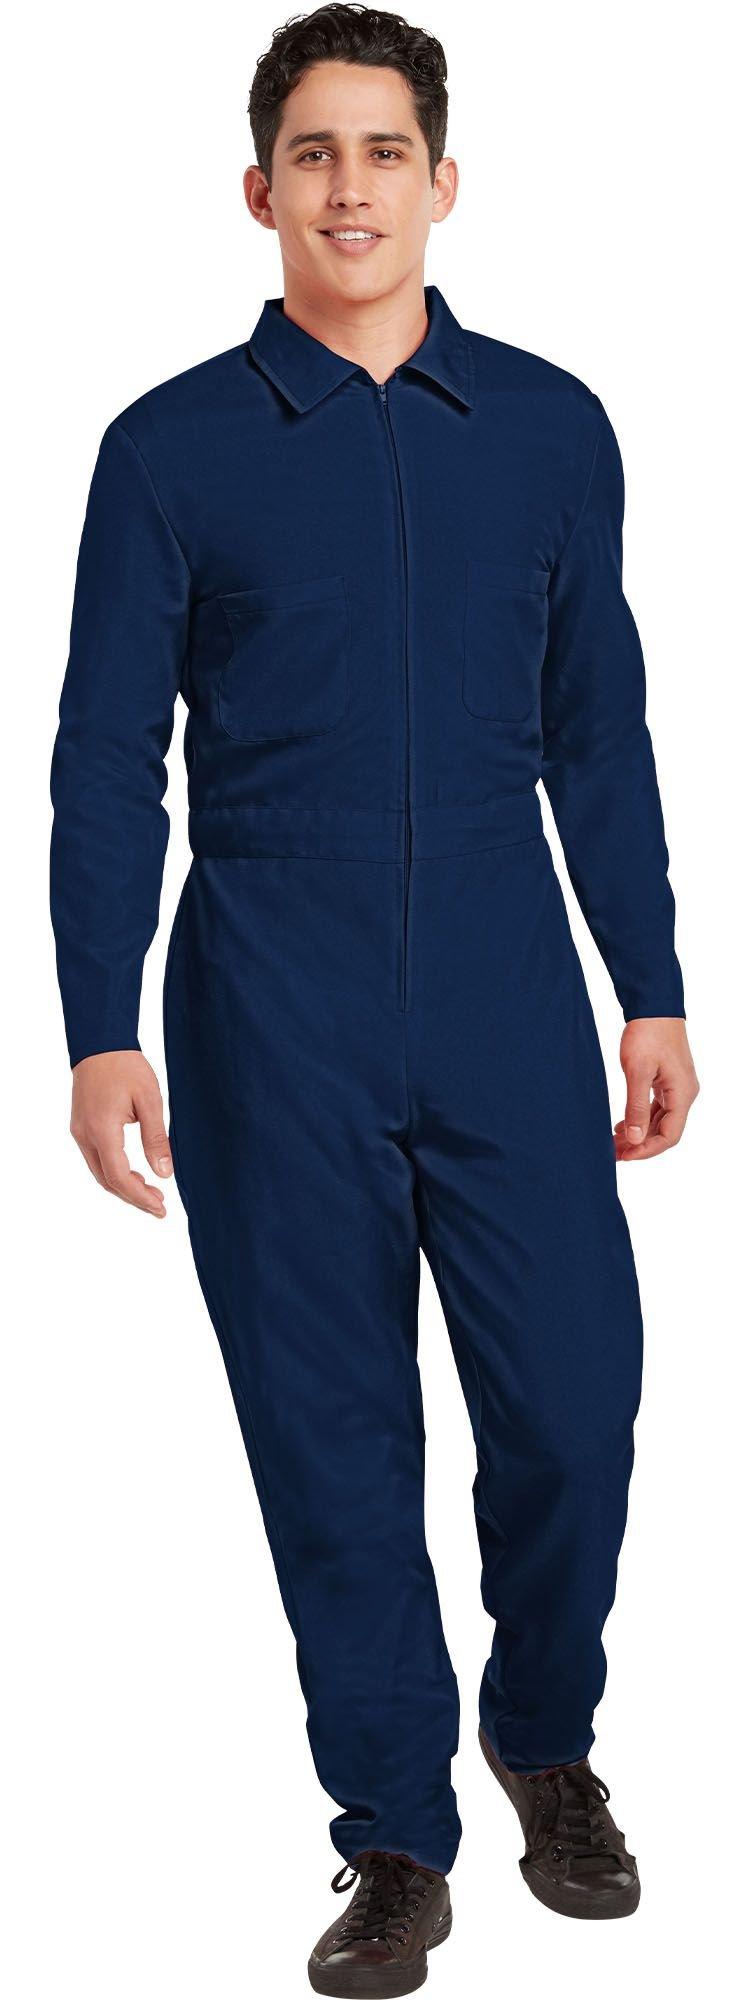 Navy Blue Mechanic Coveralls for Adults | Party City